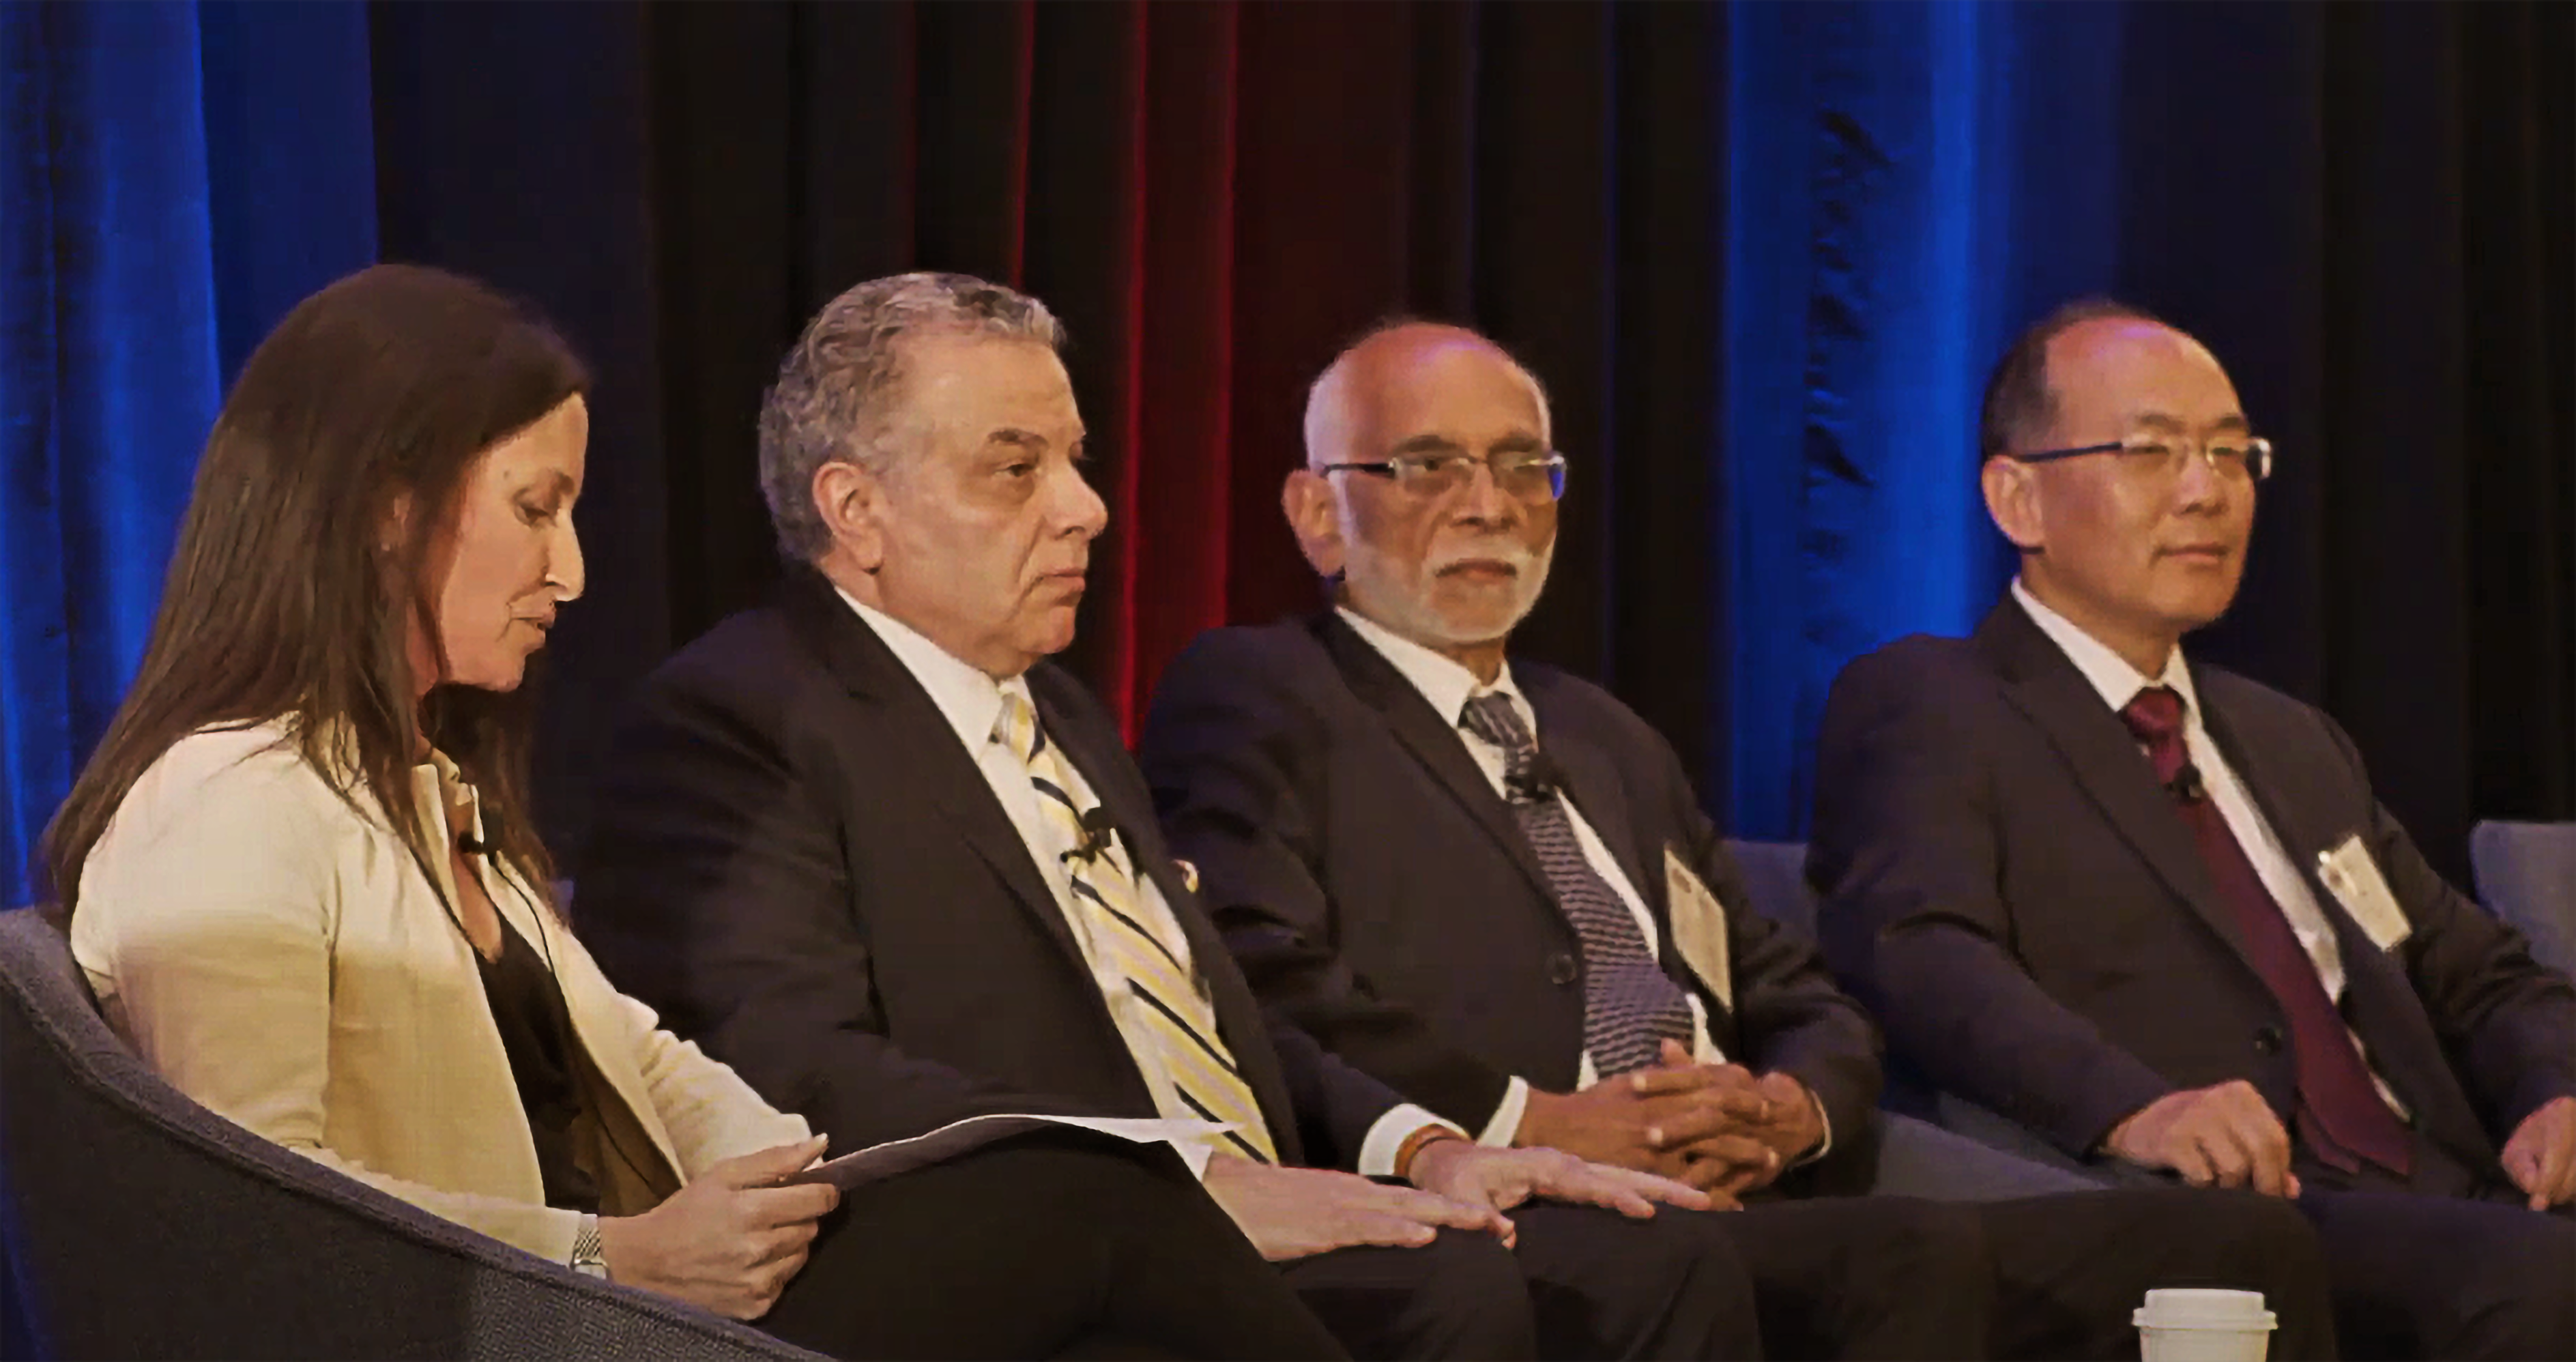 ARTBA P3 Conference’s Special Session: New Ways to Help Build America